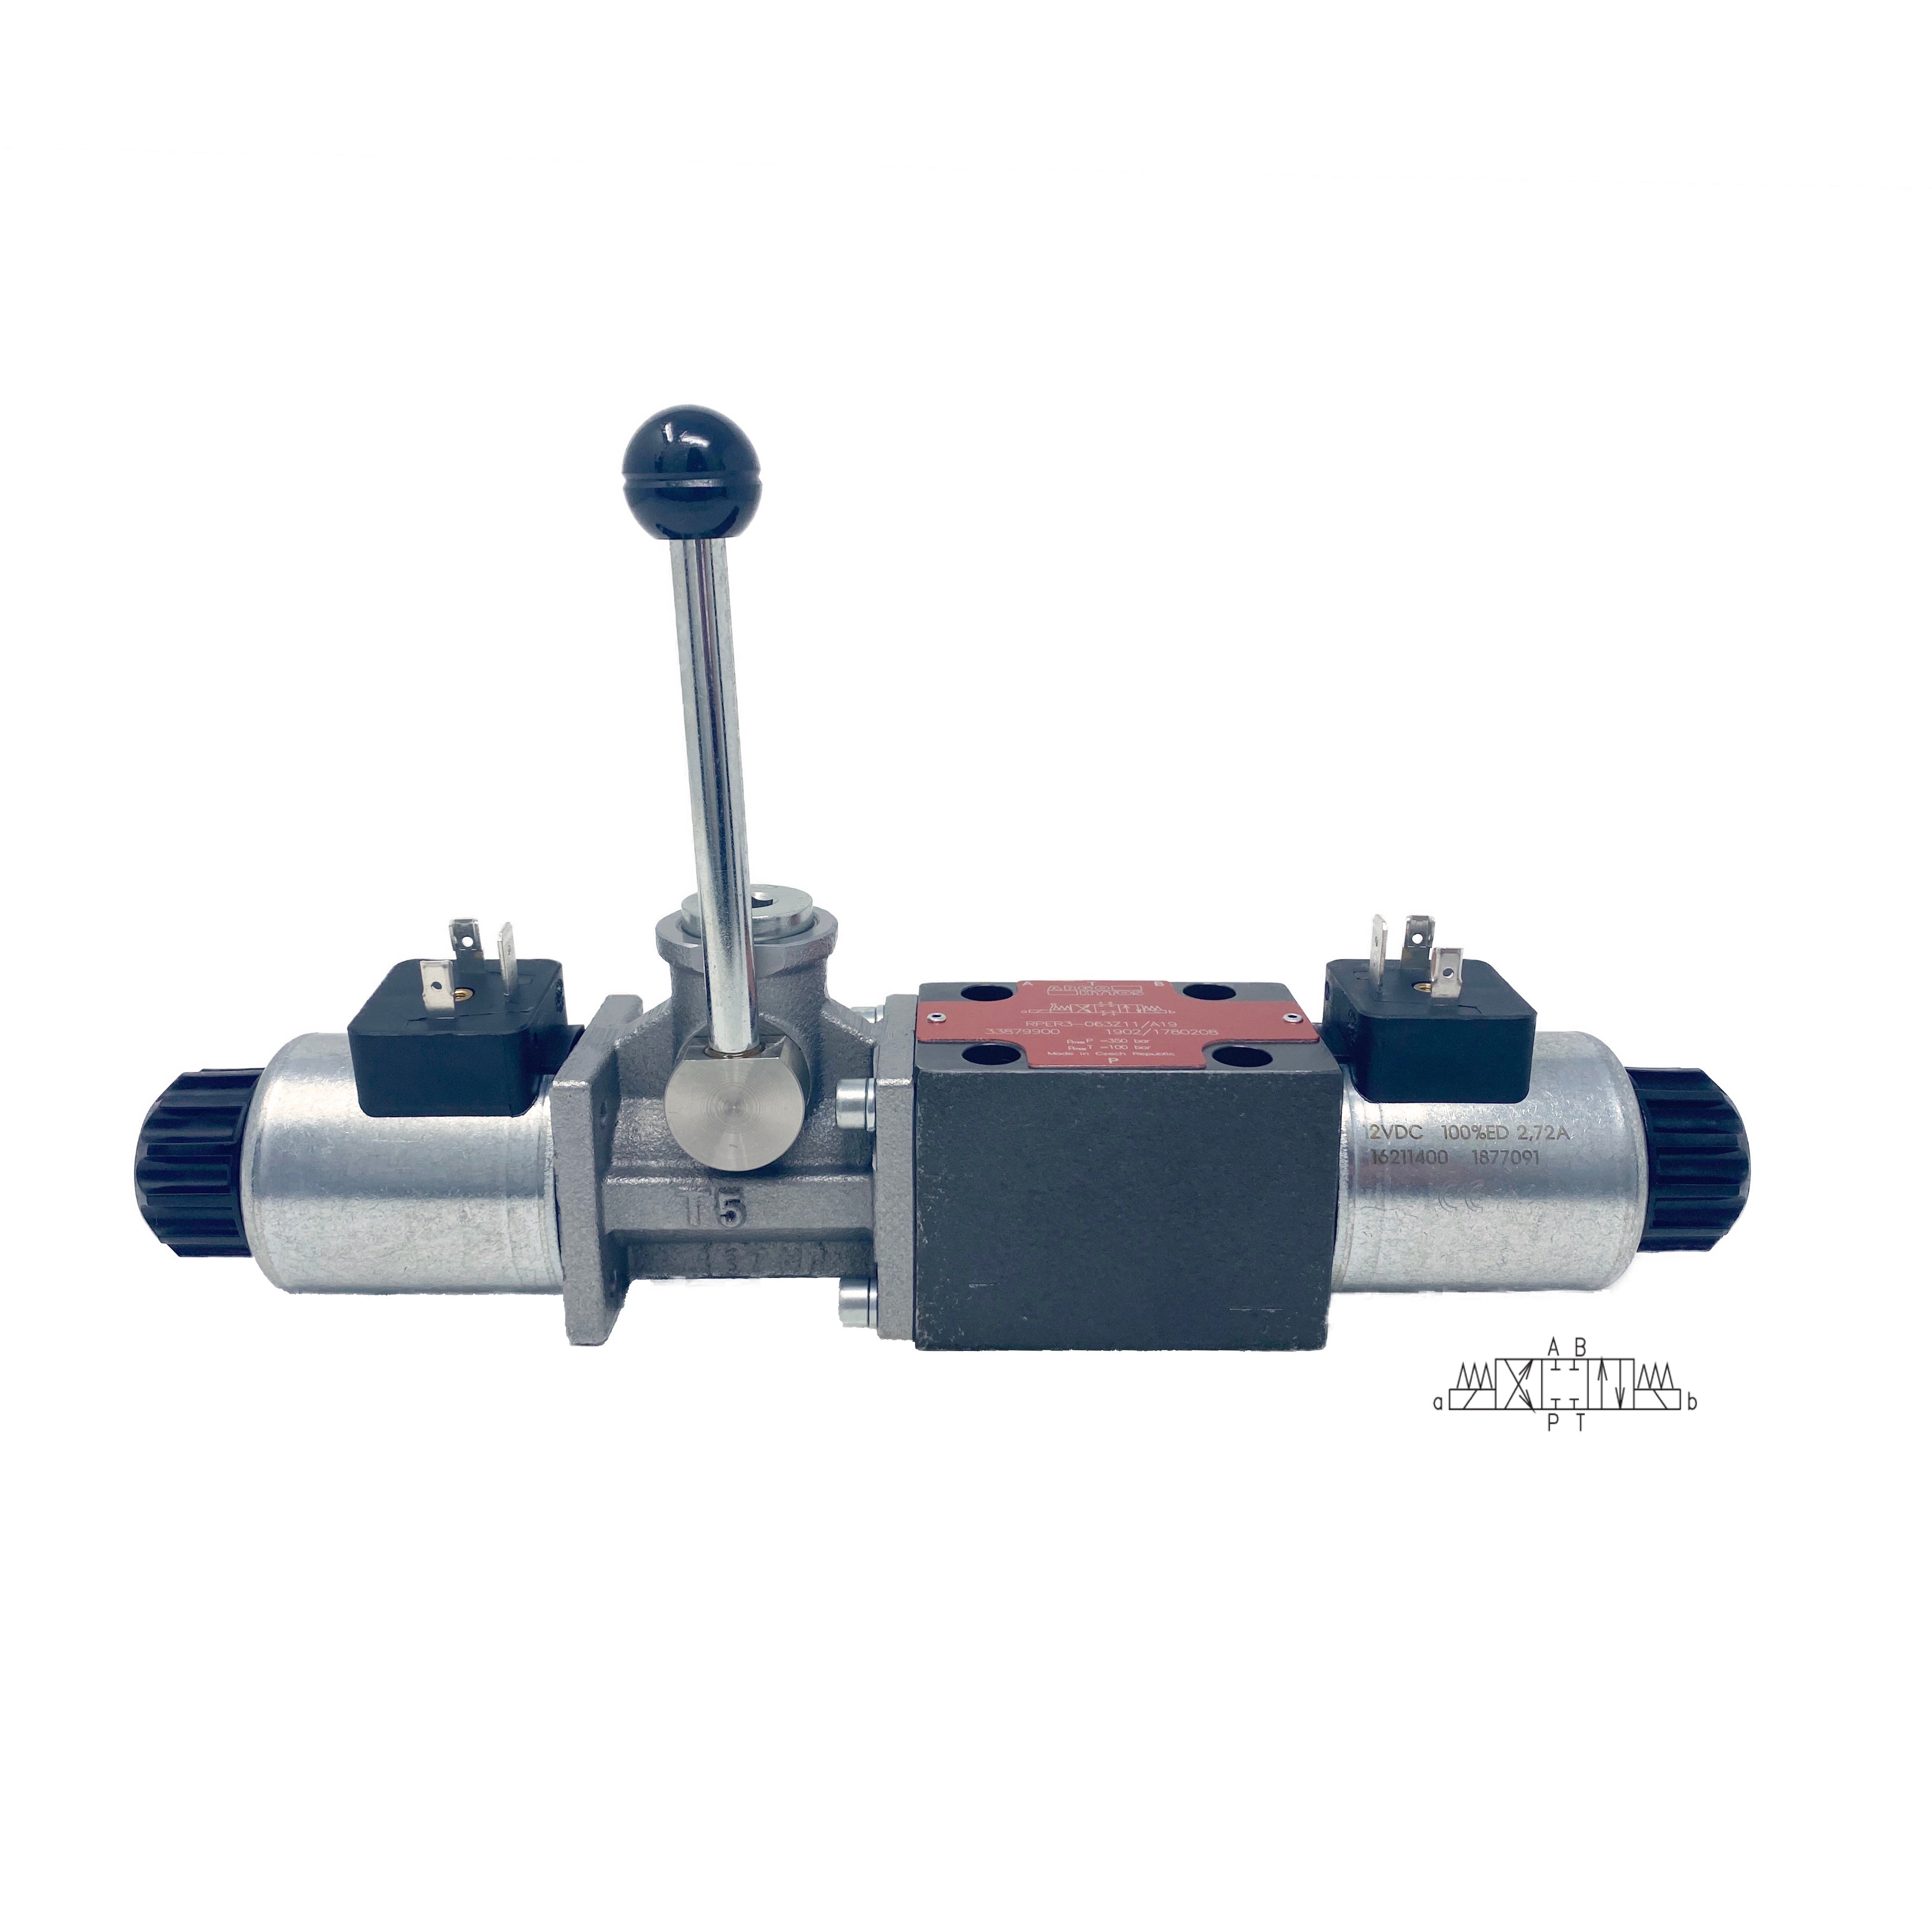 RPER3-063Z11/12060E5/A19 : Argo Directional Control Valve w/ Override Lever, D03, 21GPM, 5100psi, 3P4W, 120 VAC, DIN, Spring Centered, Cylinder Spool